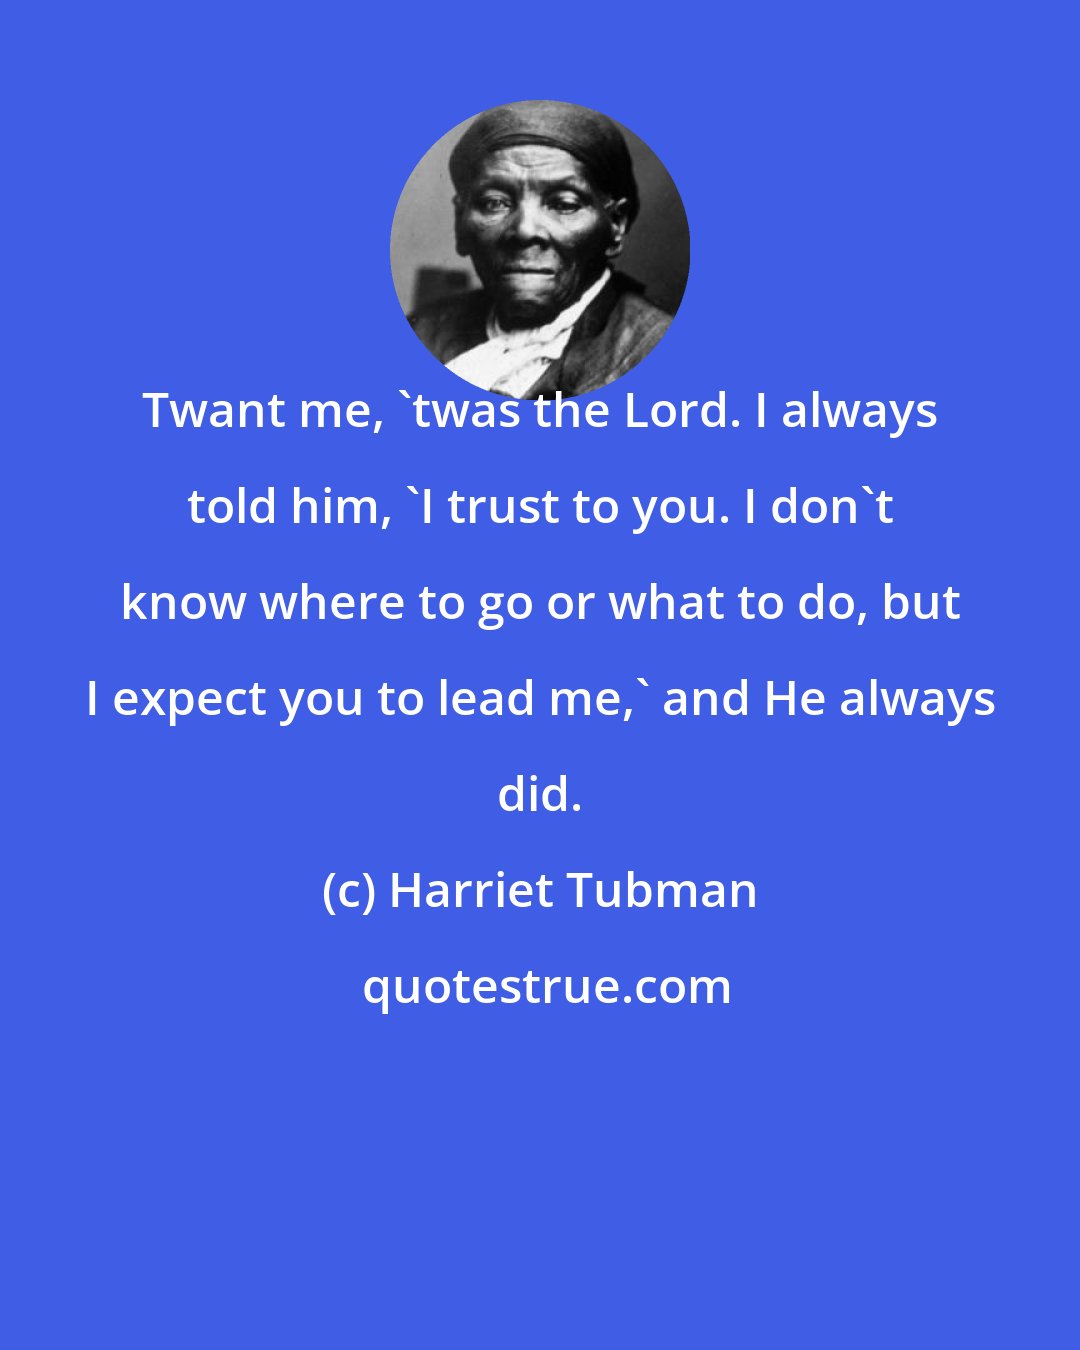 Harriet Tubman: Twant me, 'twas the Lord. I always told him, 'I trust to you. I don't know where to go or what to do, but I expect you to lead me,' and He always did.